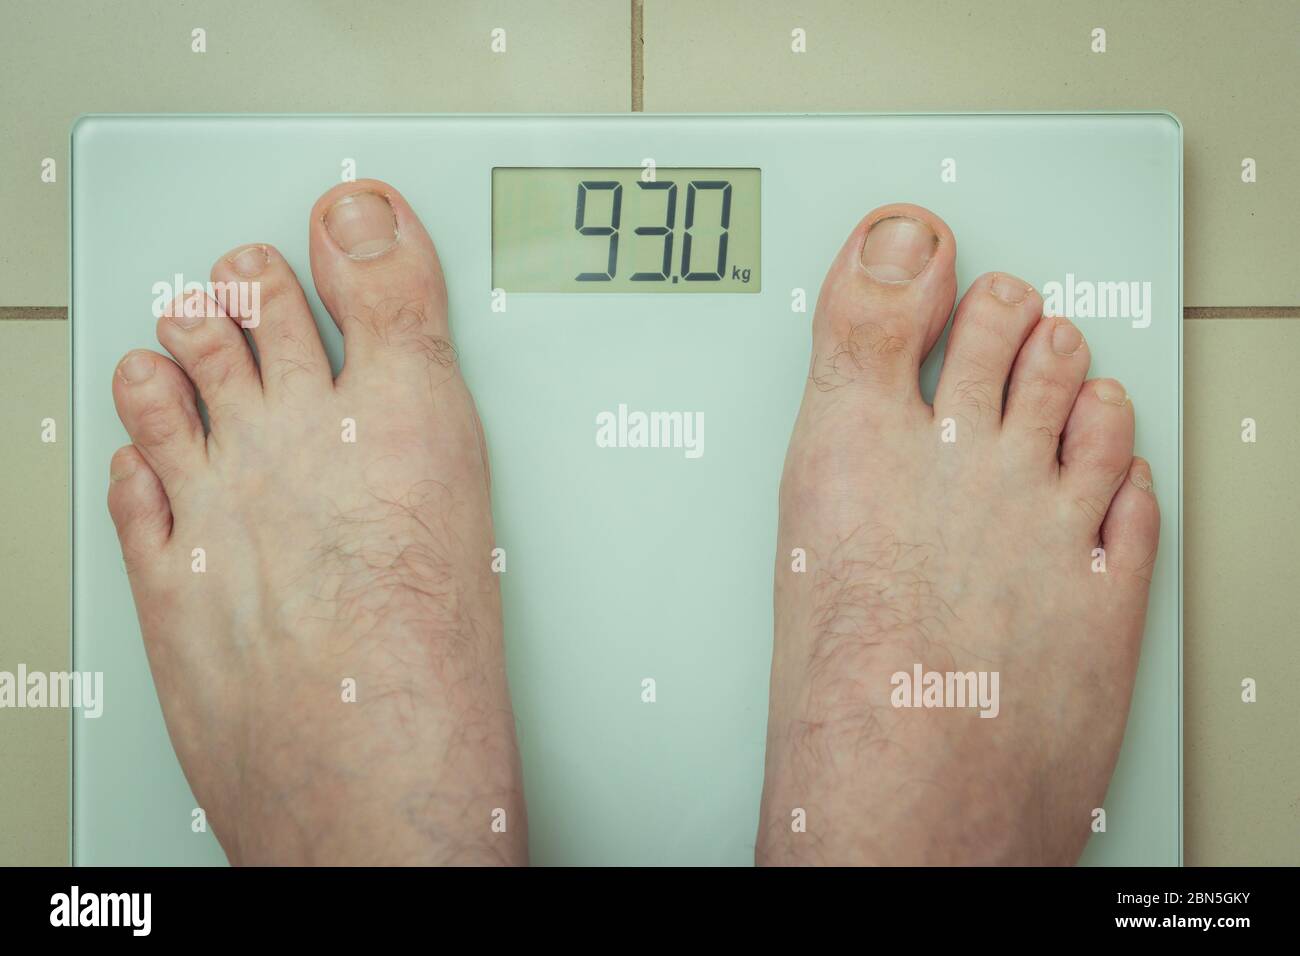 https://c8.alamy.com/comp/2BN5GKY/top-down-view-of-a-person-standing-on-bathroom-scales-2BN5GKY.jpg